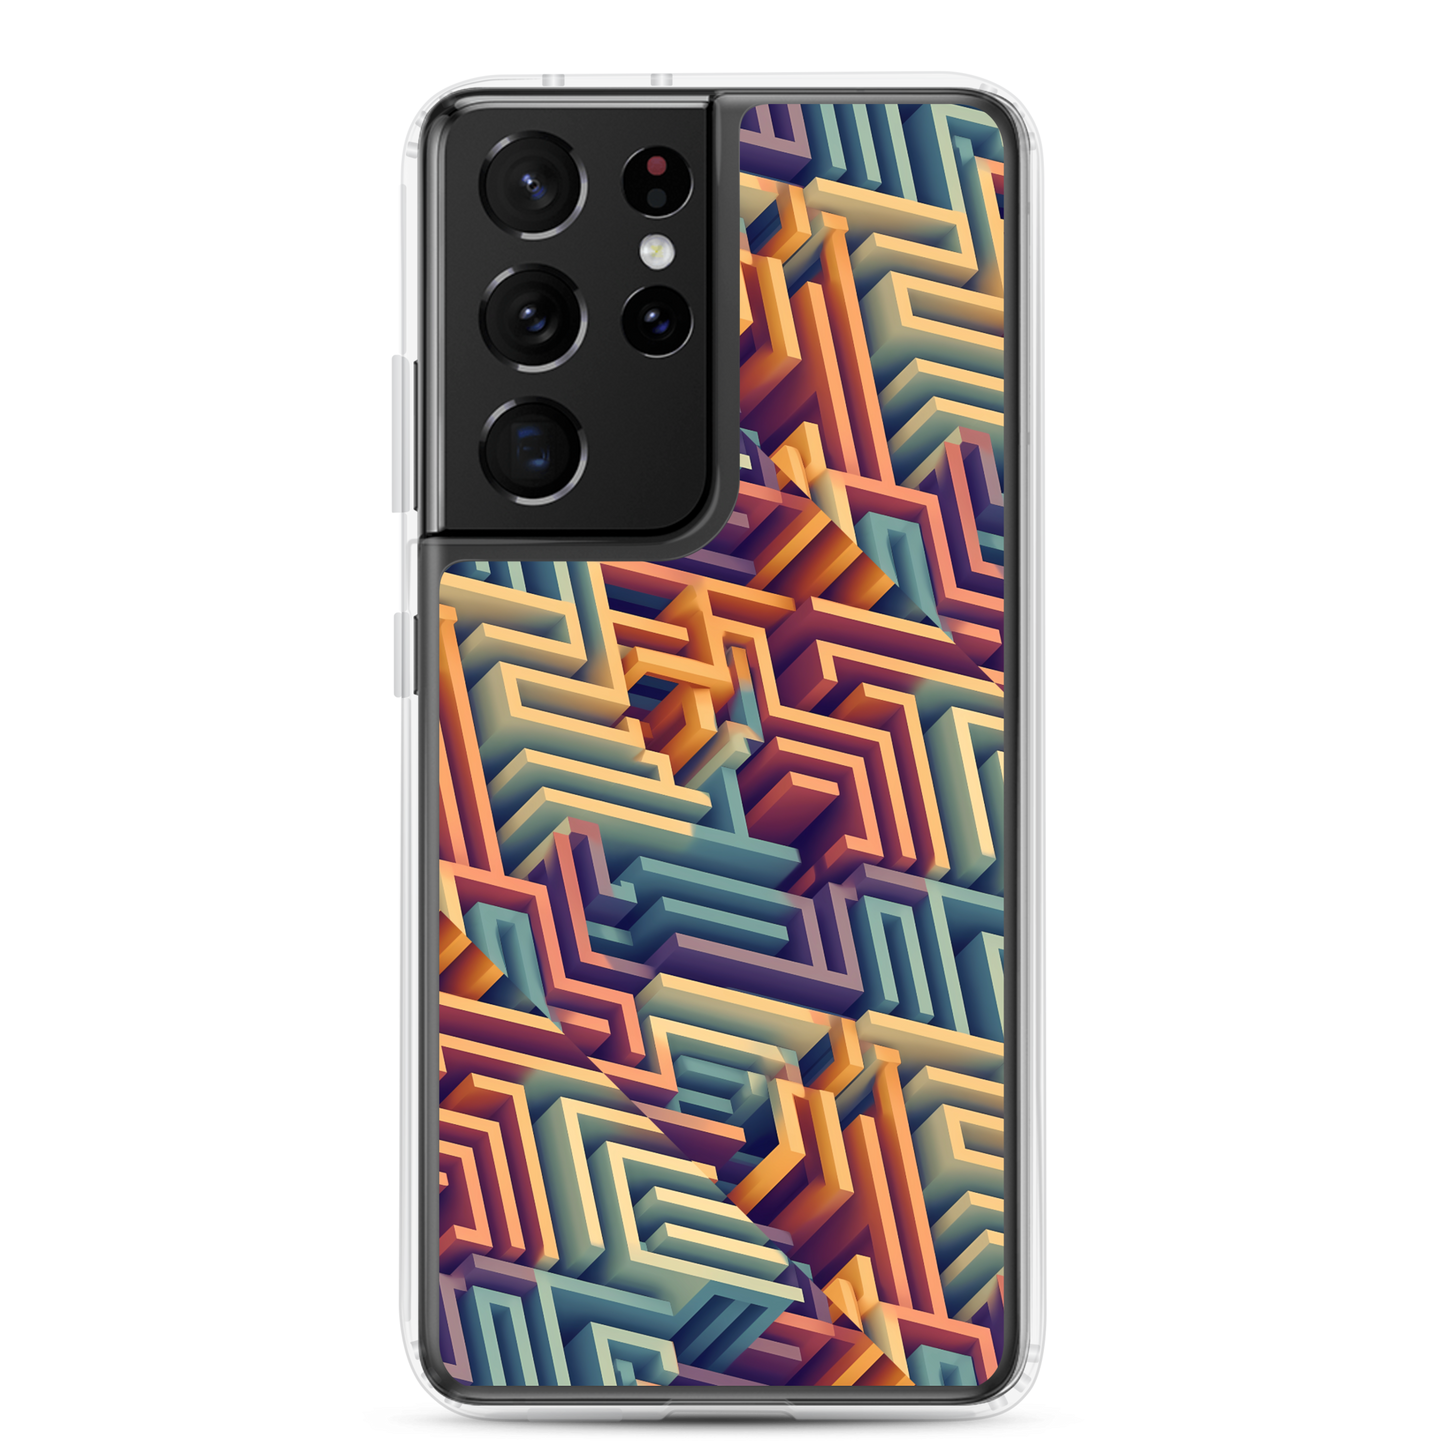 3D Maze Illusion | 3D Patterns | Clear Case for Samsung - #3